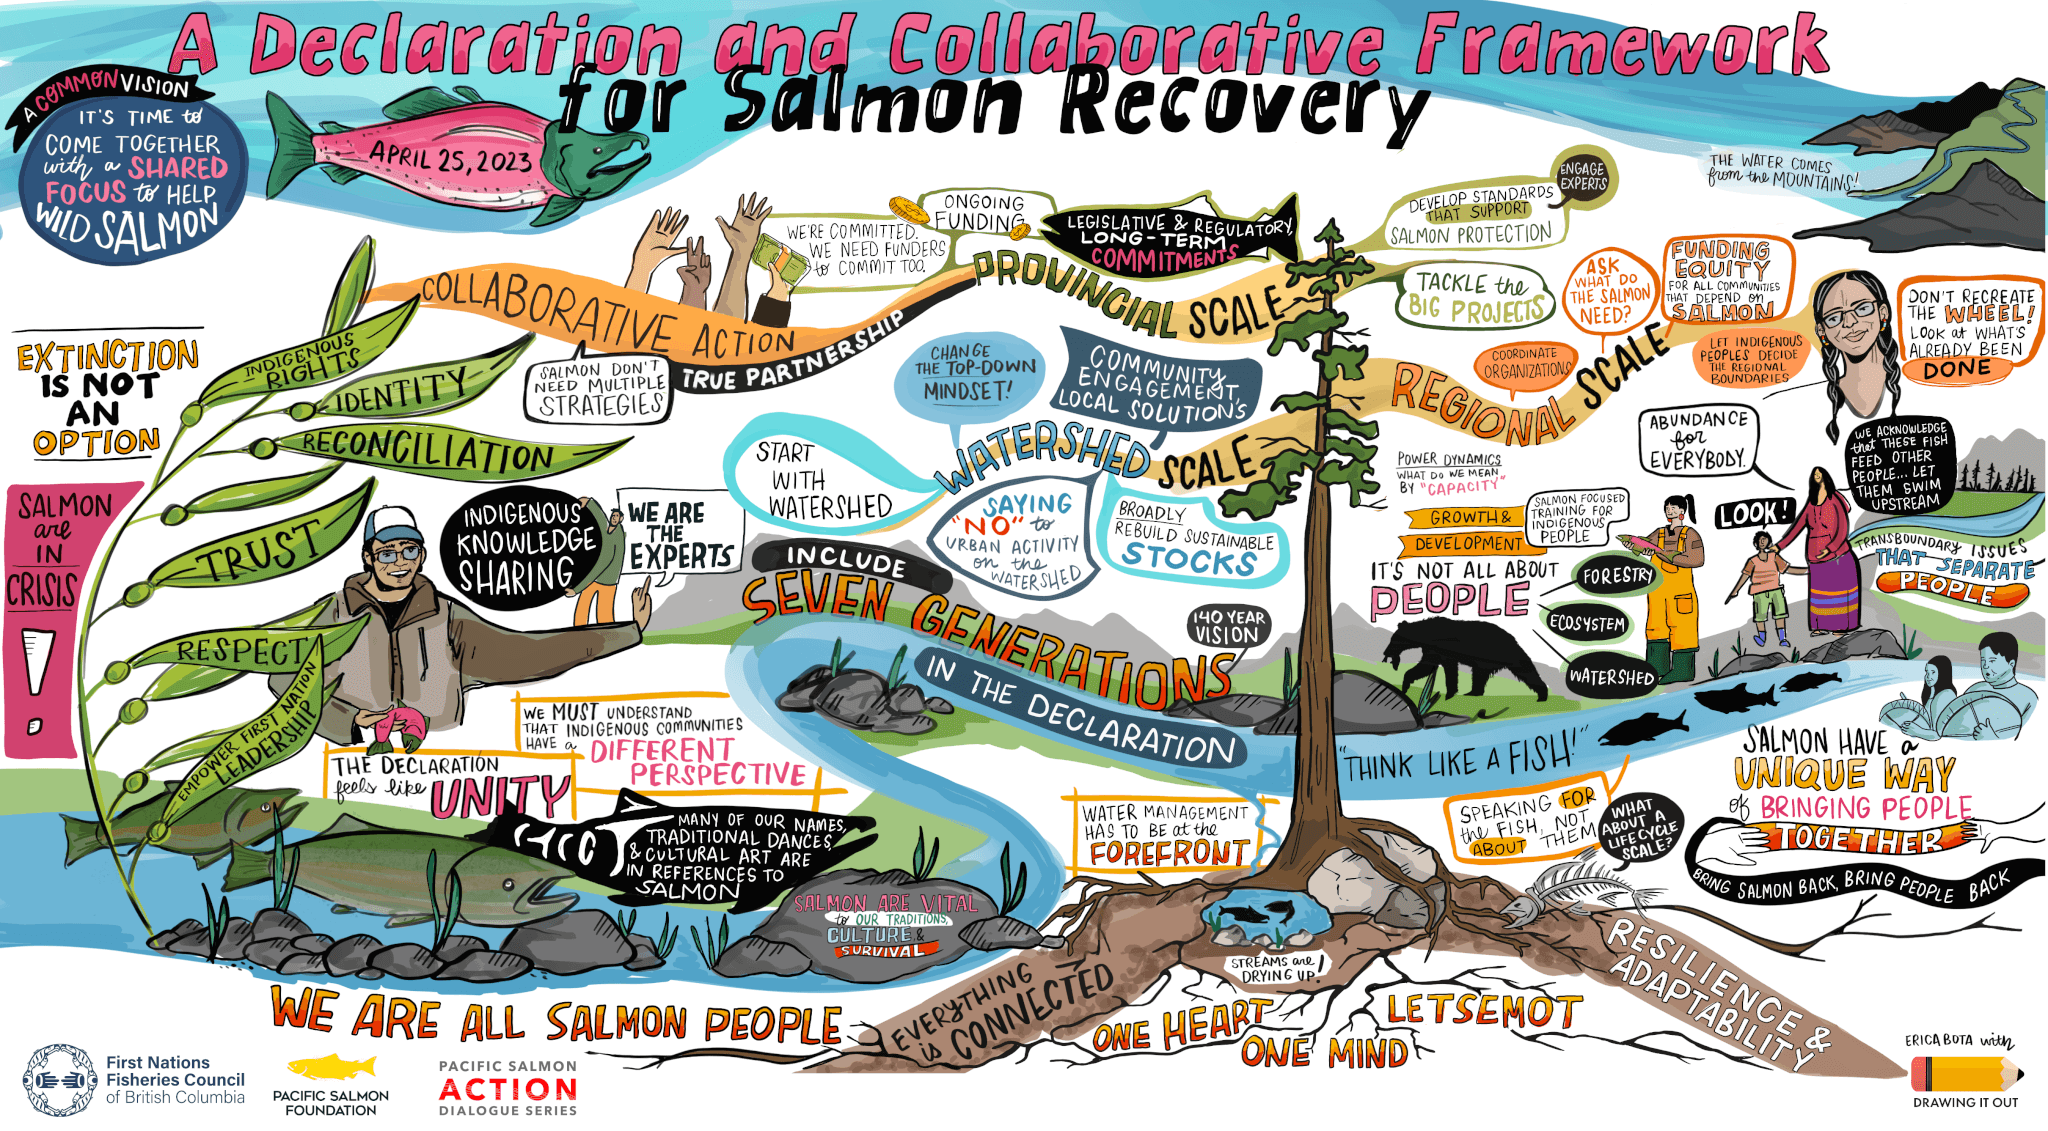 FNFC & PSF work toward a collaborative model for salmon recovery